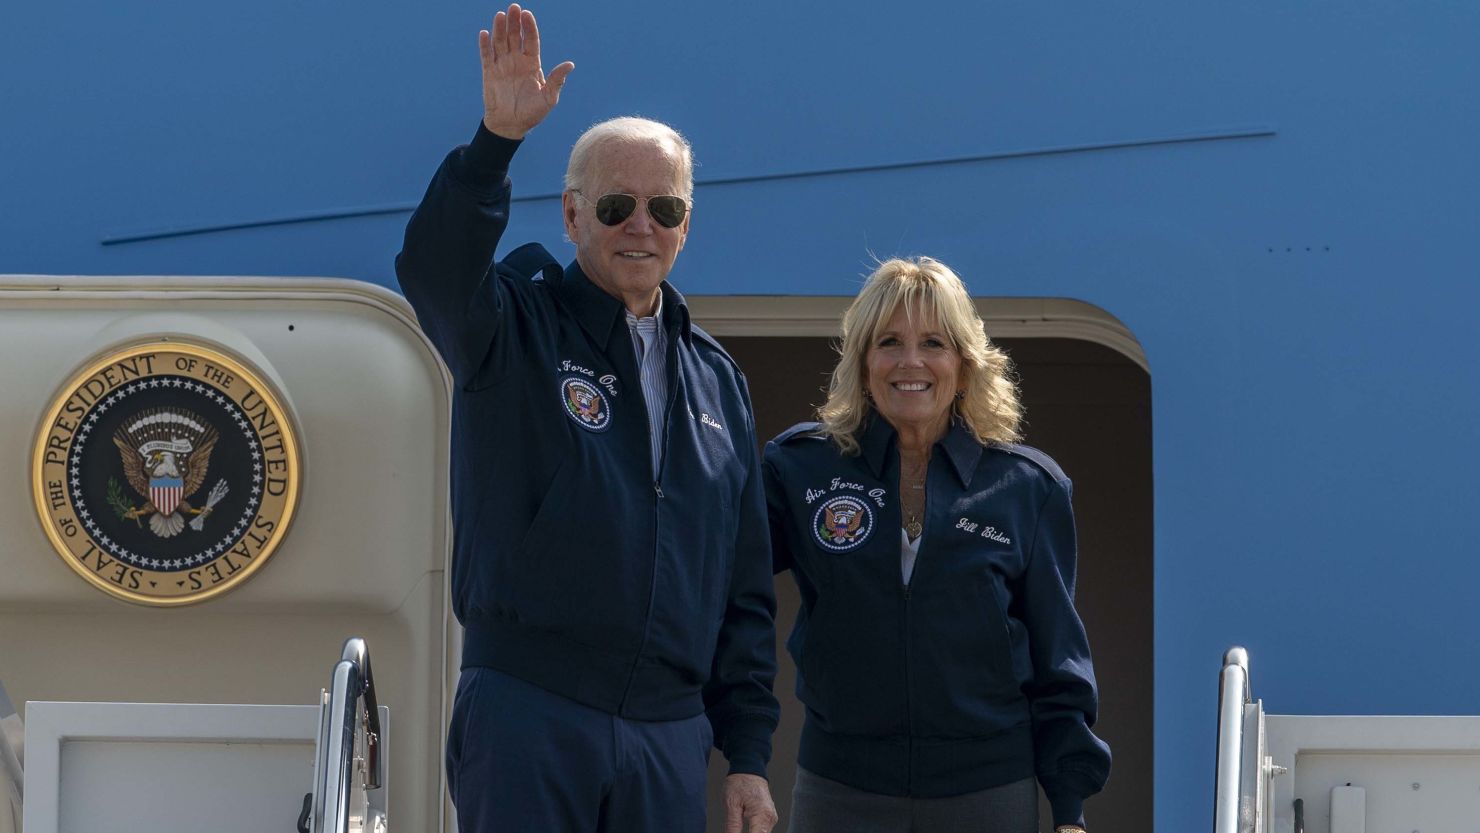 President Joe Biden, here with first lady Jill Biden, waves atop of the steps of Air Force One at Joint Base Andrews in Maryland on September 17, 2022, before their departure for London.